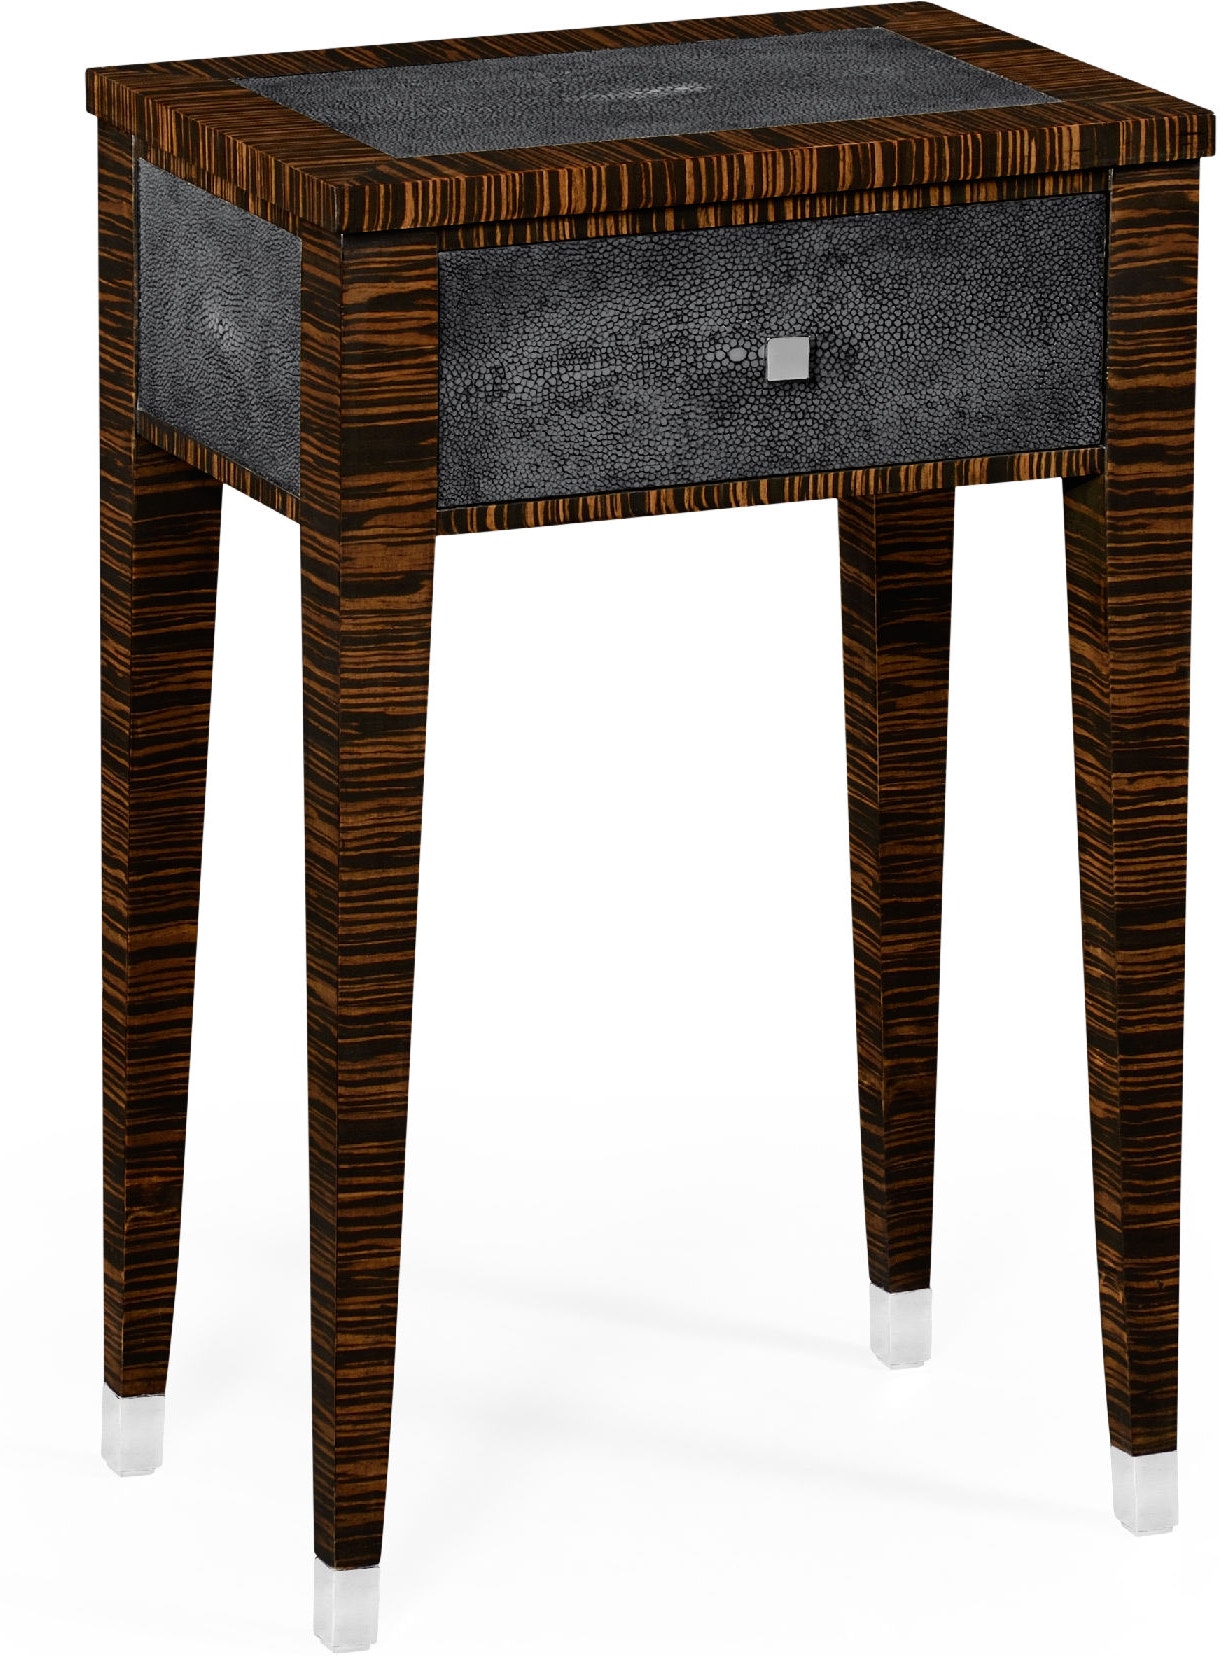 Anthracite Faux Shagreen And Macassar Ebony Lamp Table Qj494522mas